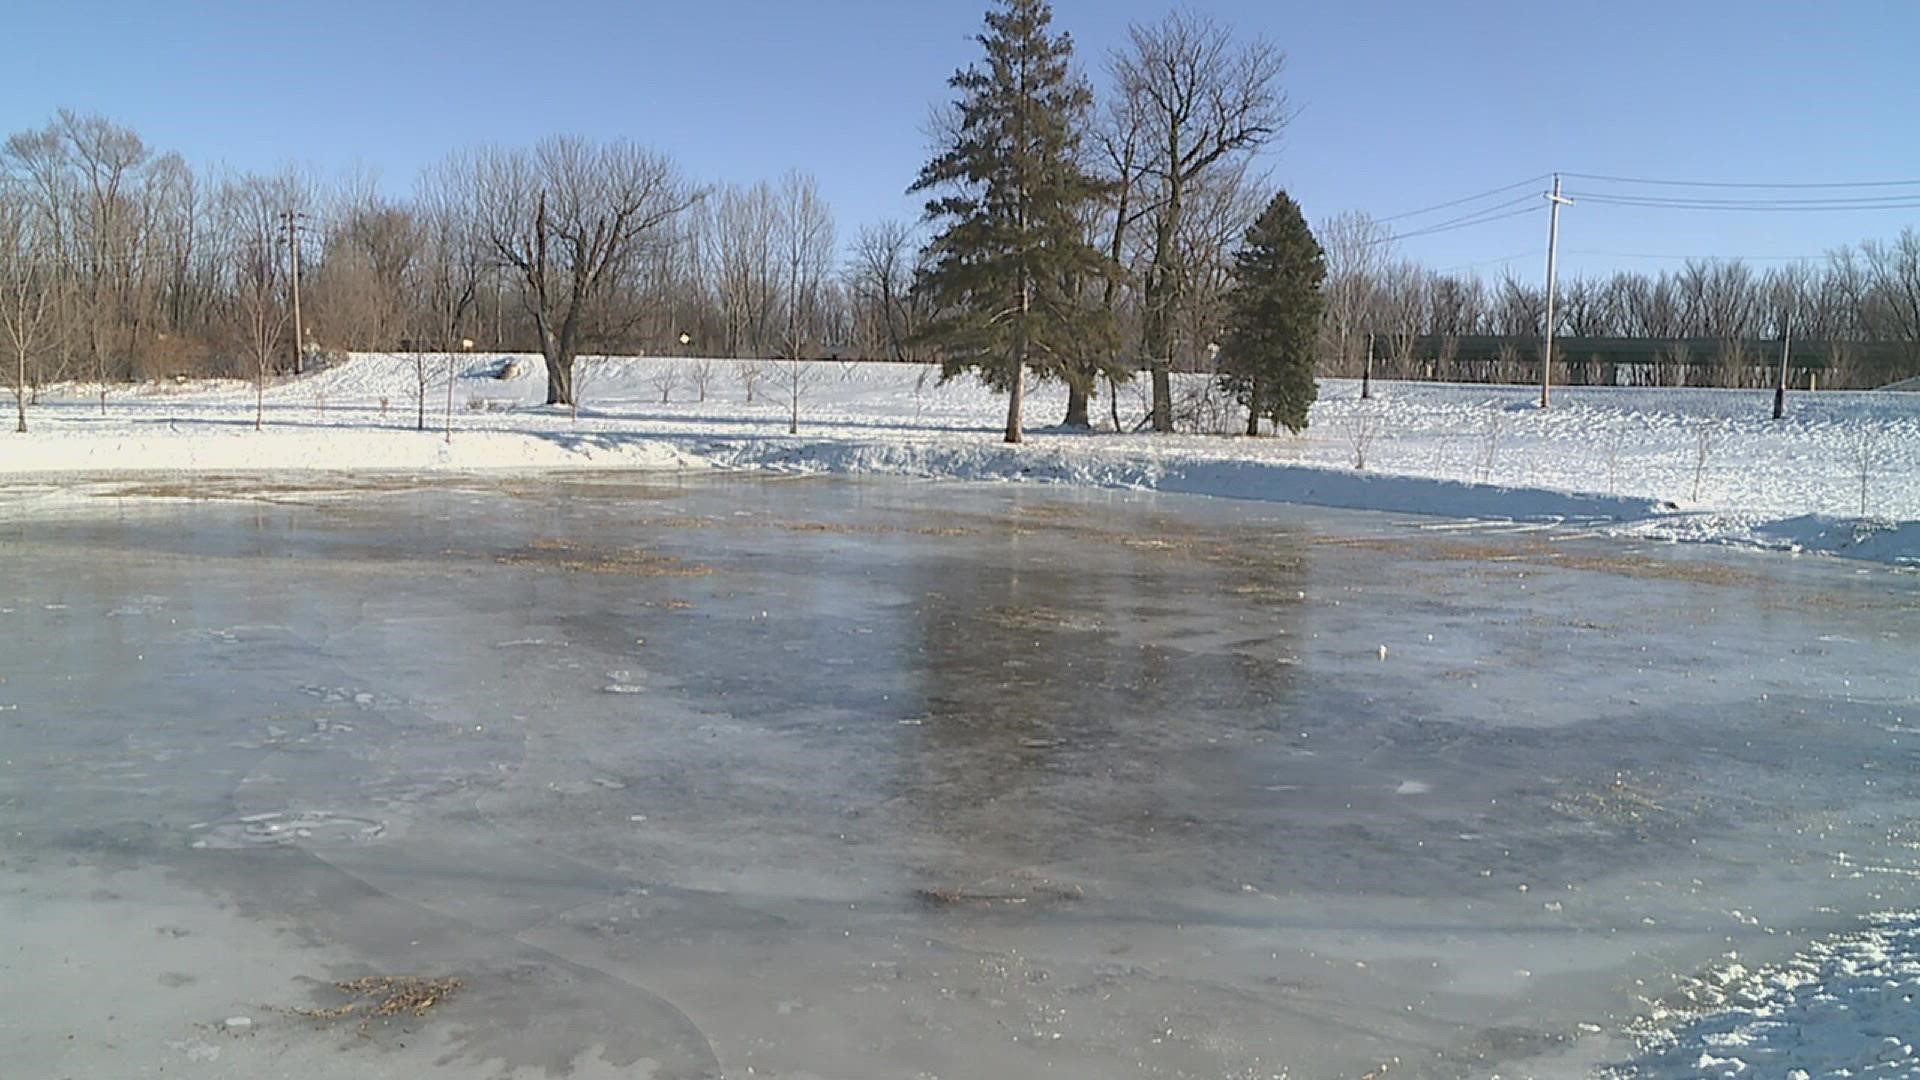 The City of Davenport recently converted a flood retention pond into an ice skating rink in the neighborhood near the Roosevelt Community Center.